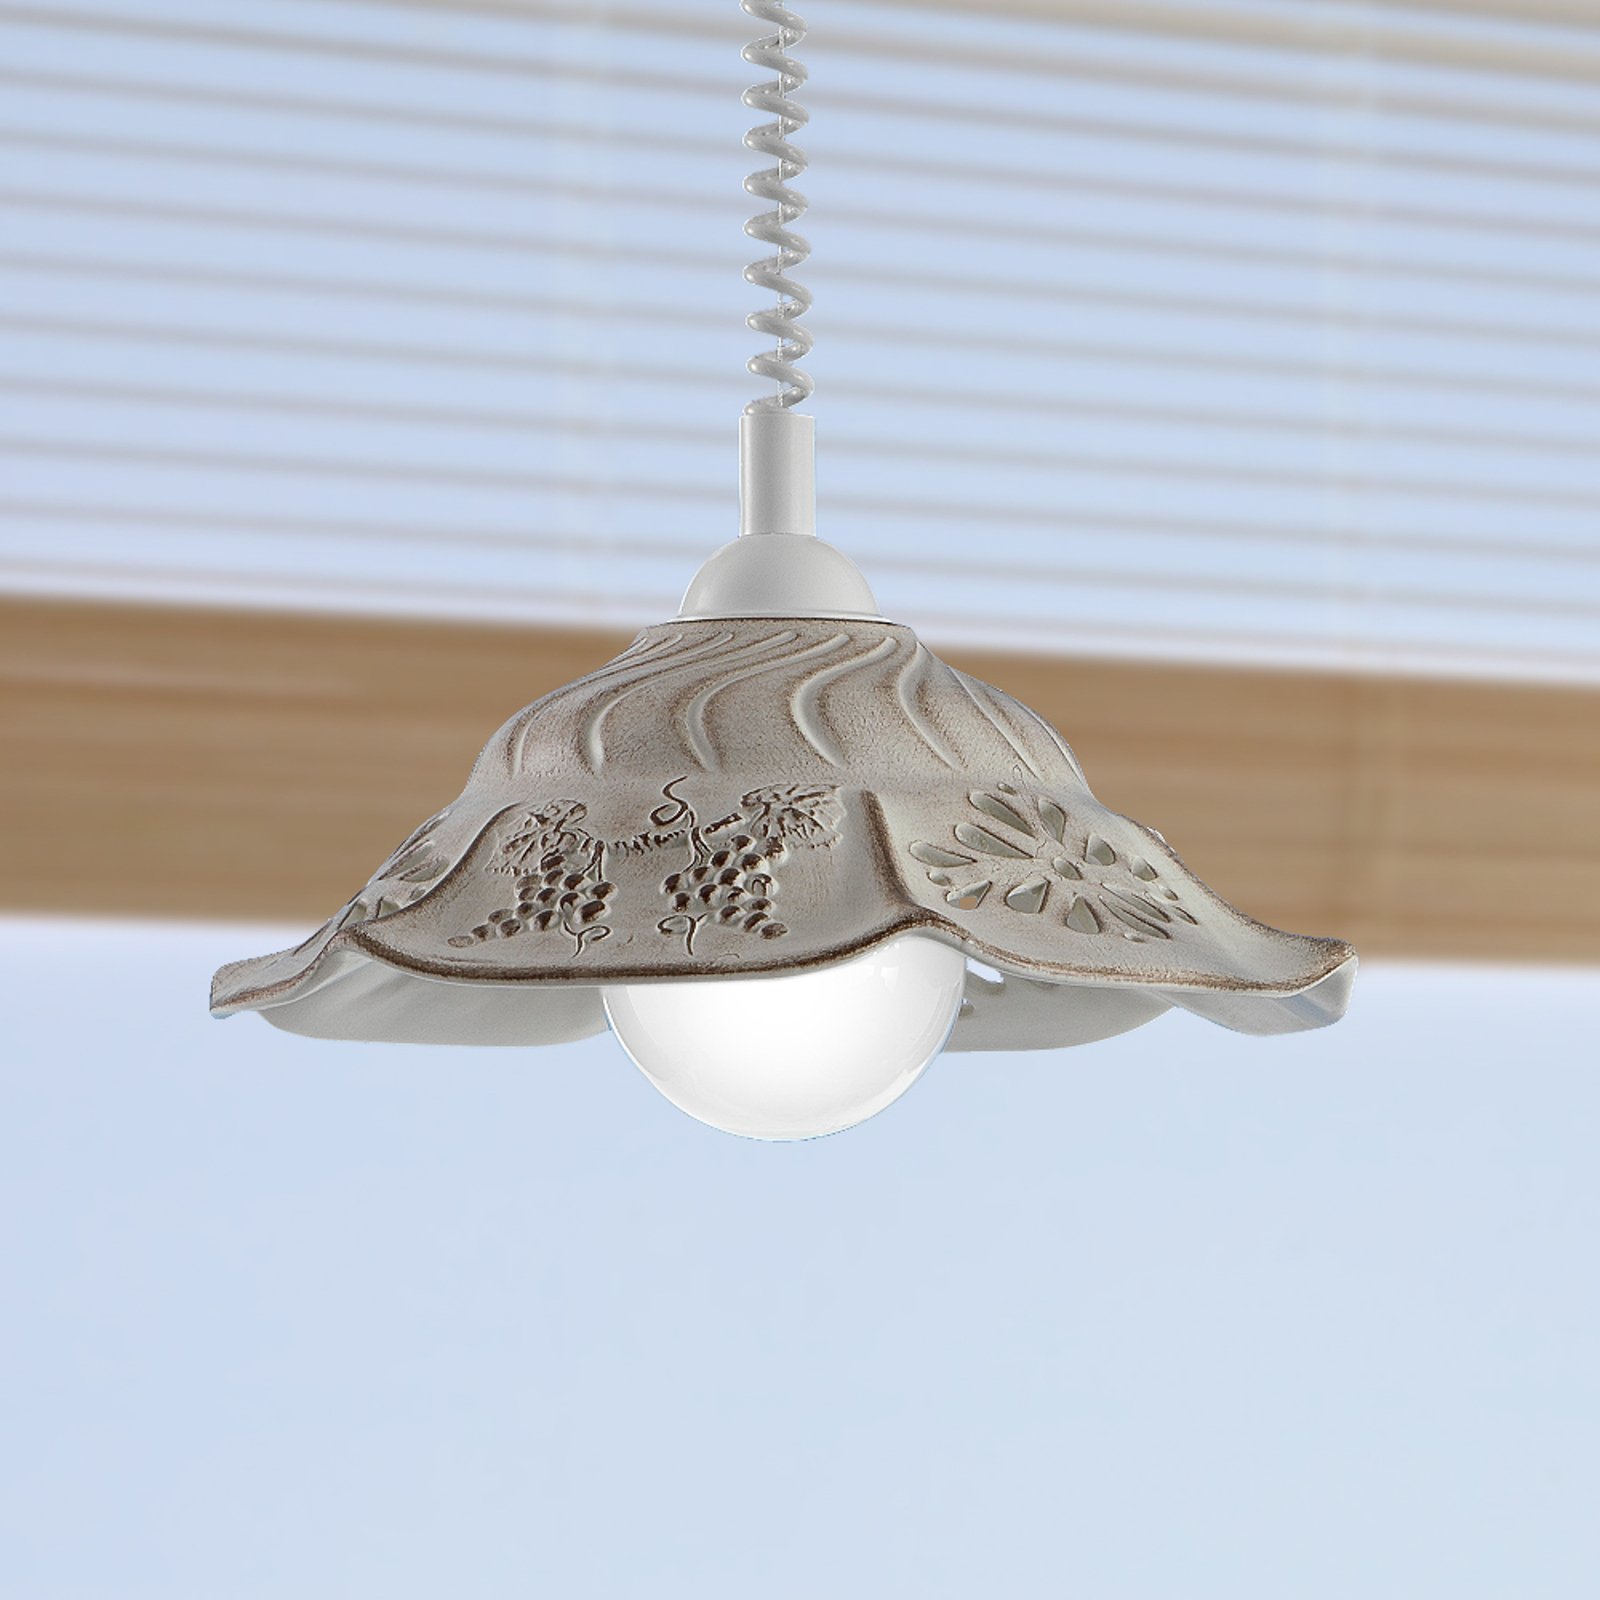 VITELA hanging light with a rustic appearance